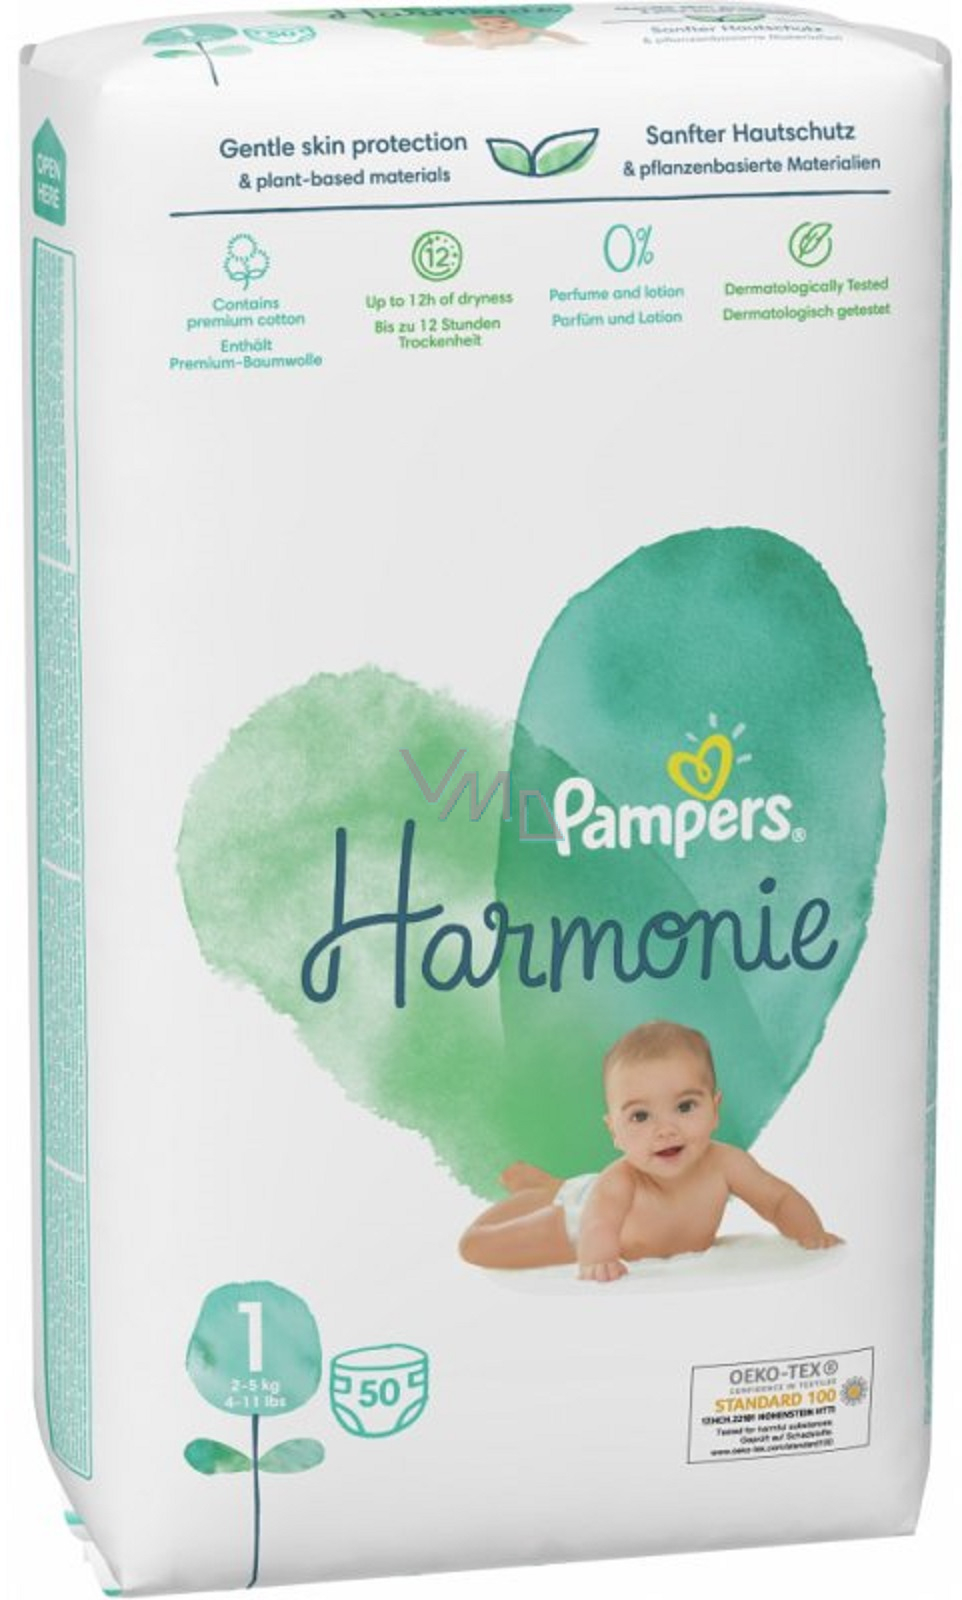 Pampers Couches Harmonie Pants Junior taille 6